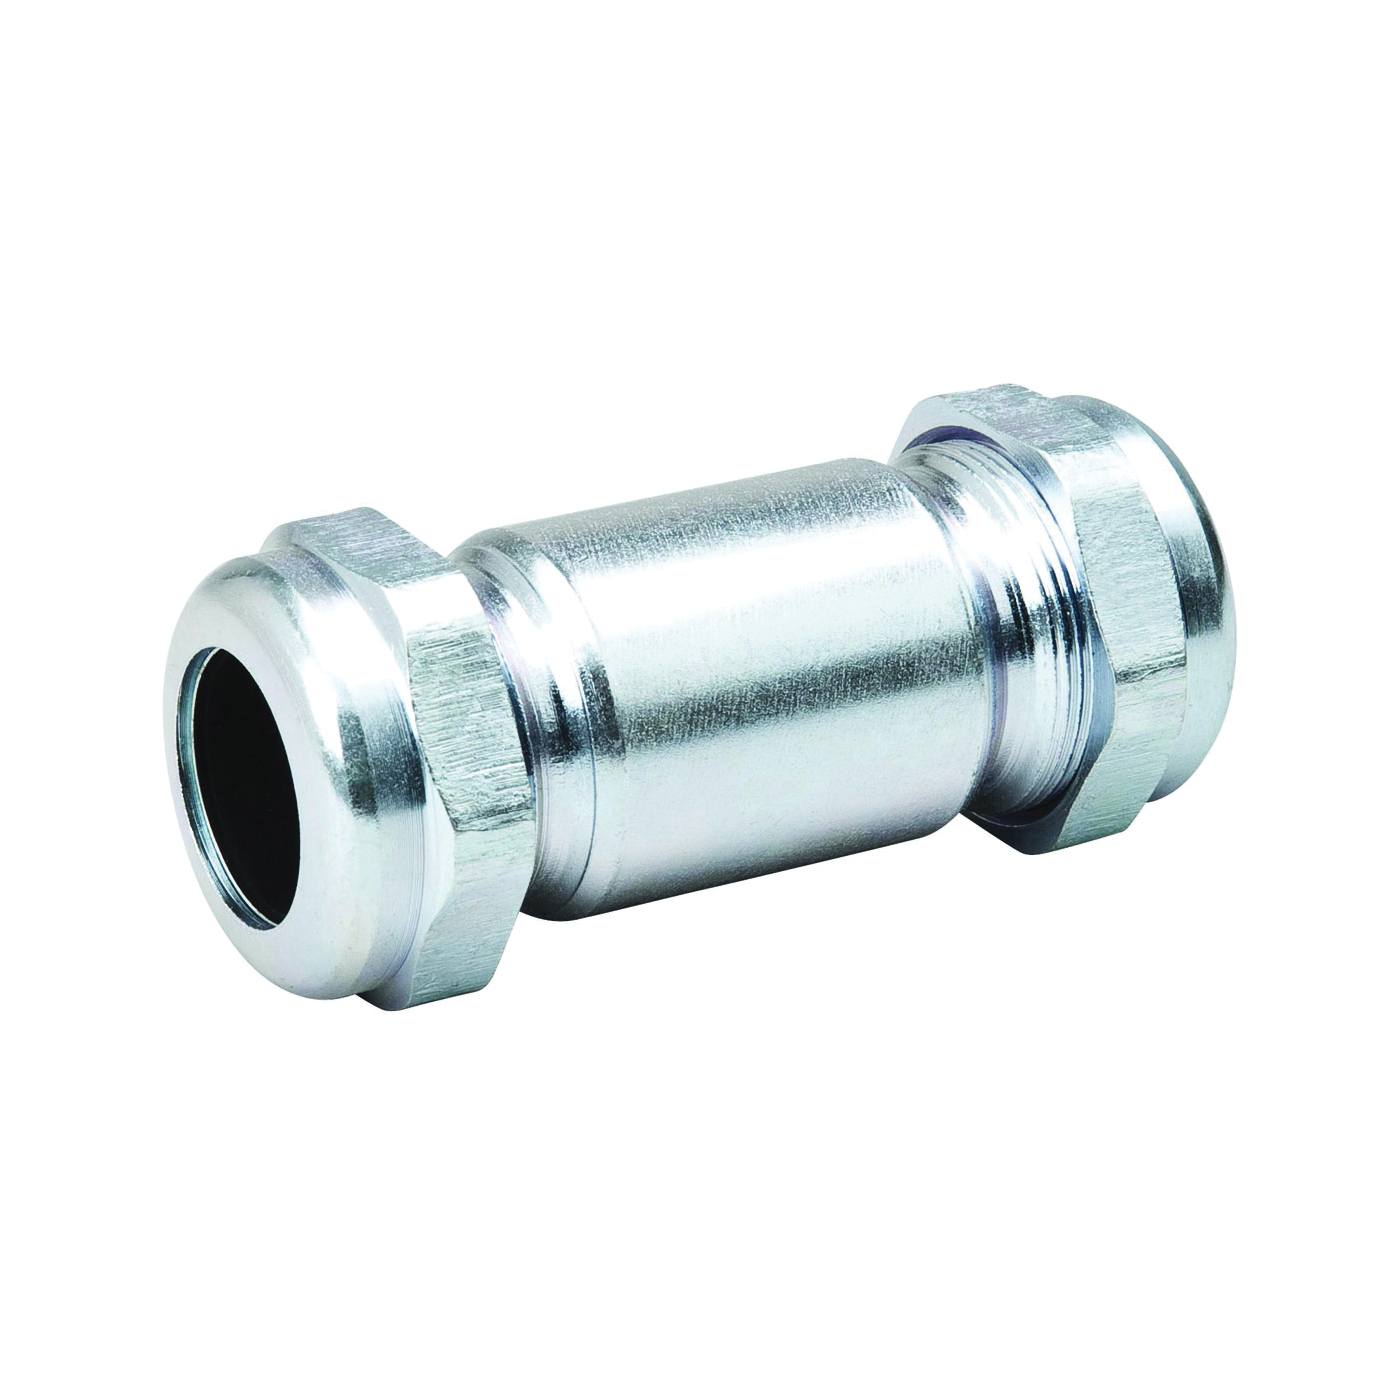 160-007HC Pipe Coupling, 1-1/2 in, Compression x IPS, 125 psi Pressure